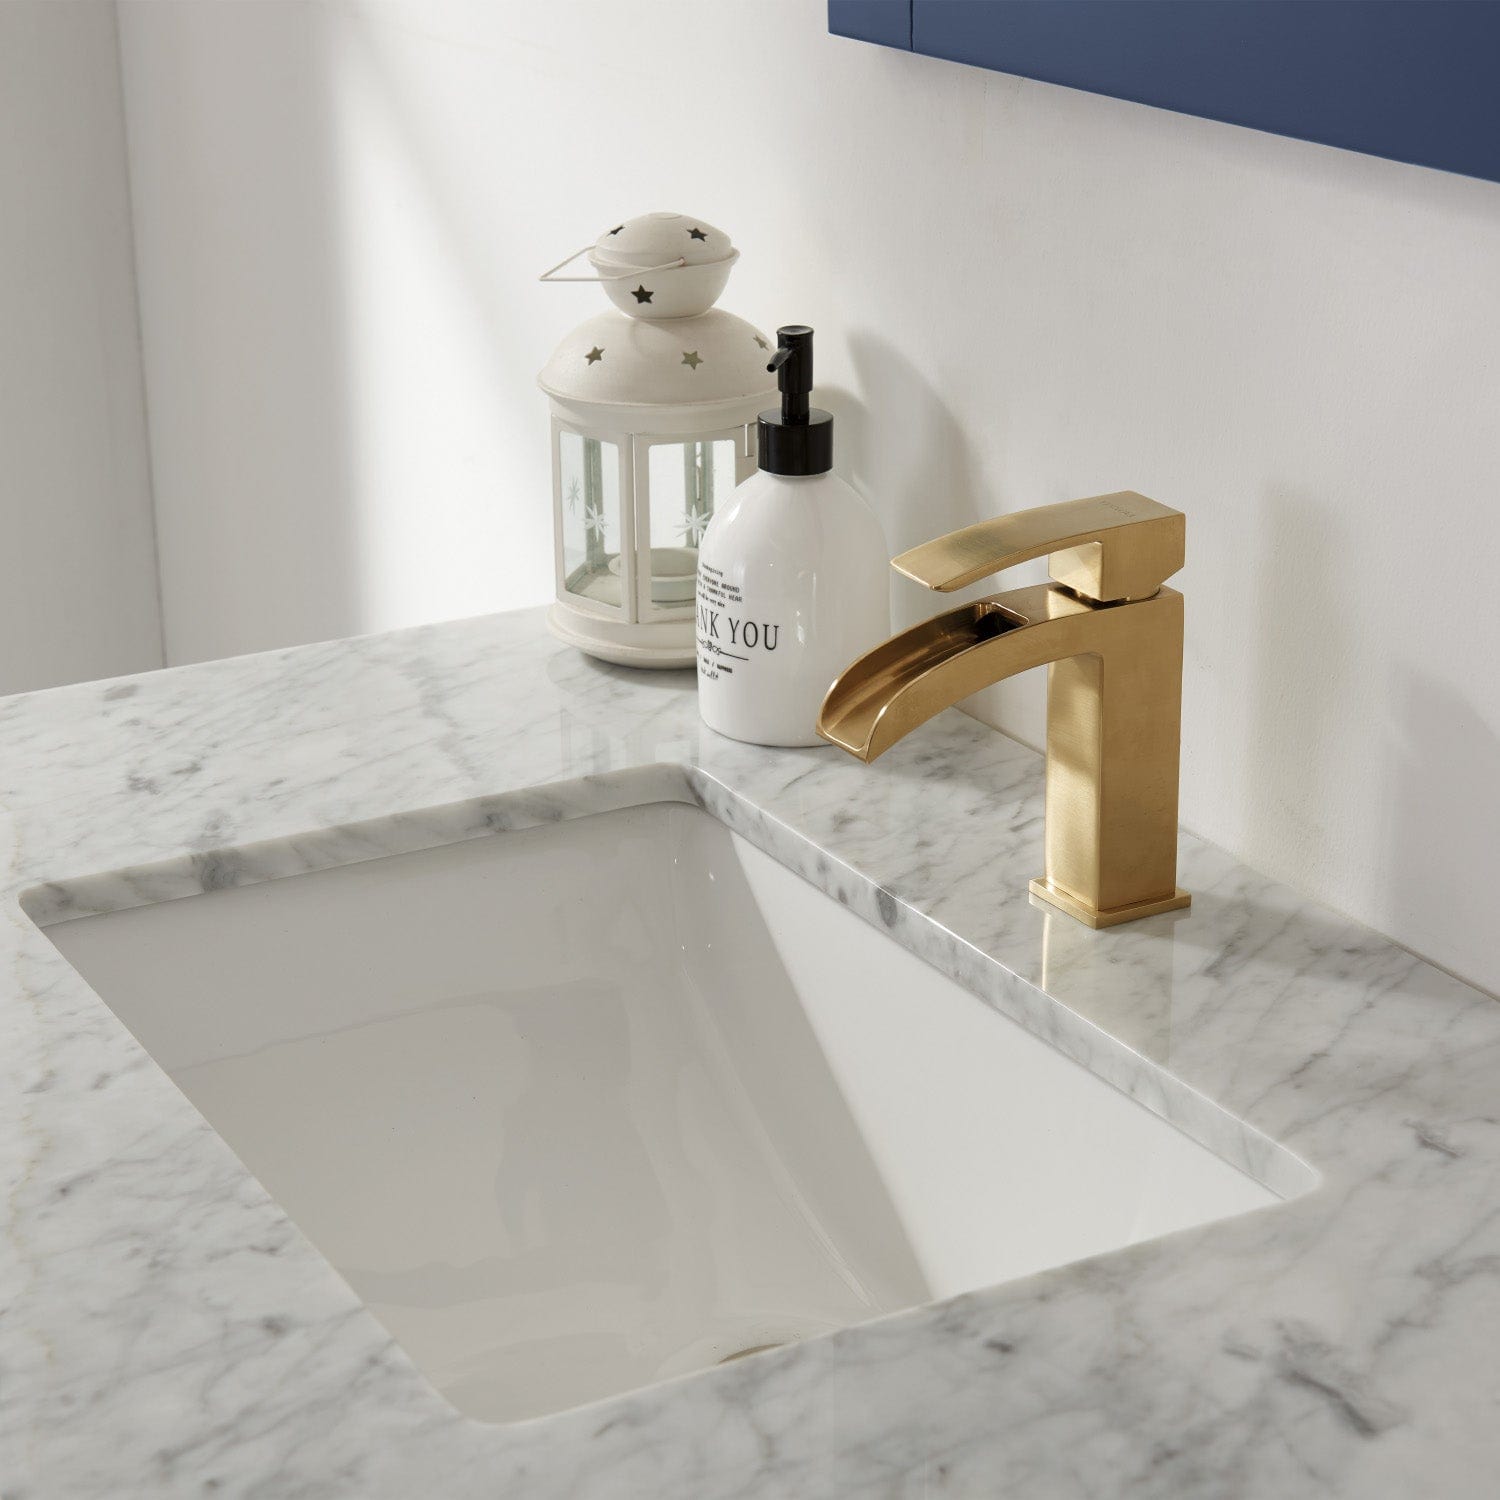 Altair Remi 36" Single Bathroom Vanity Set in Royal Blue and Carrara White Marble Countertop with Mirror 532036-RB-CA - Molaix631112971416Vanity532036-RB-CA